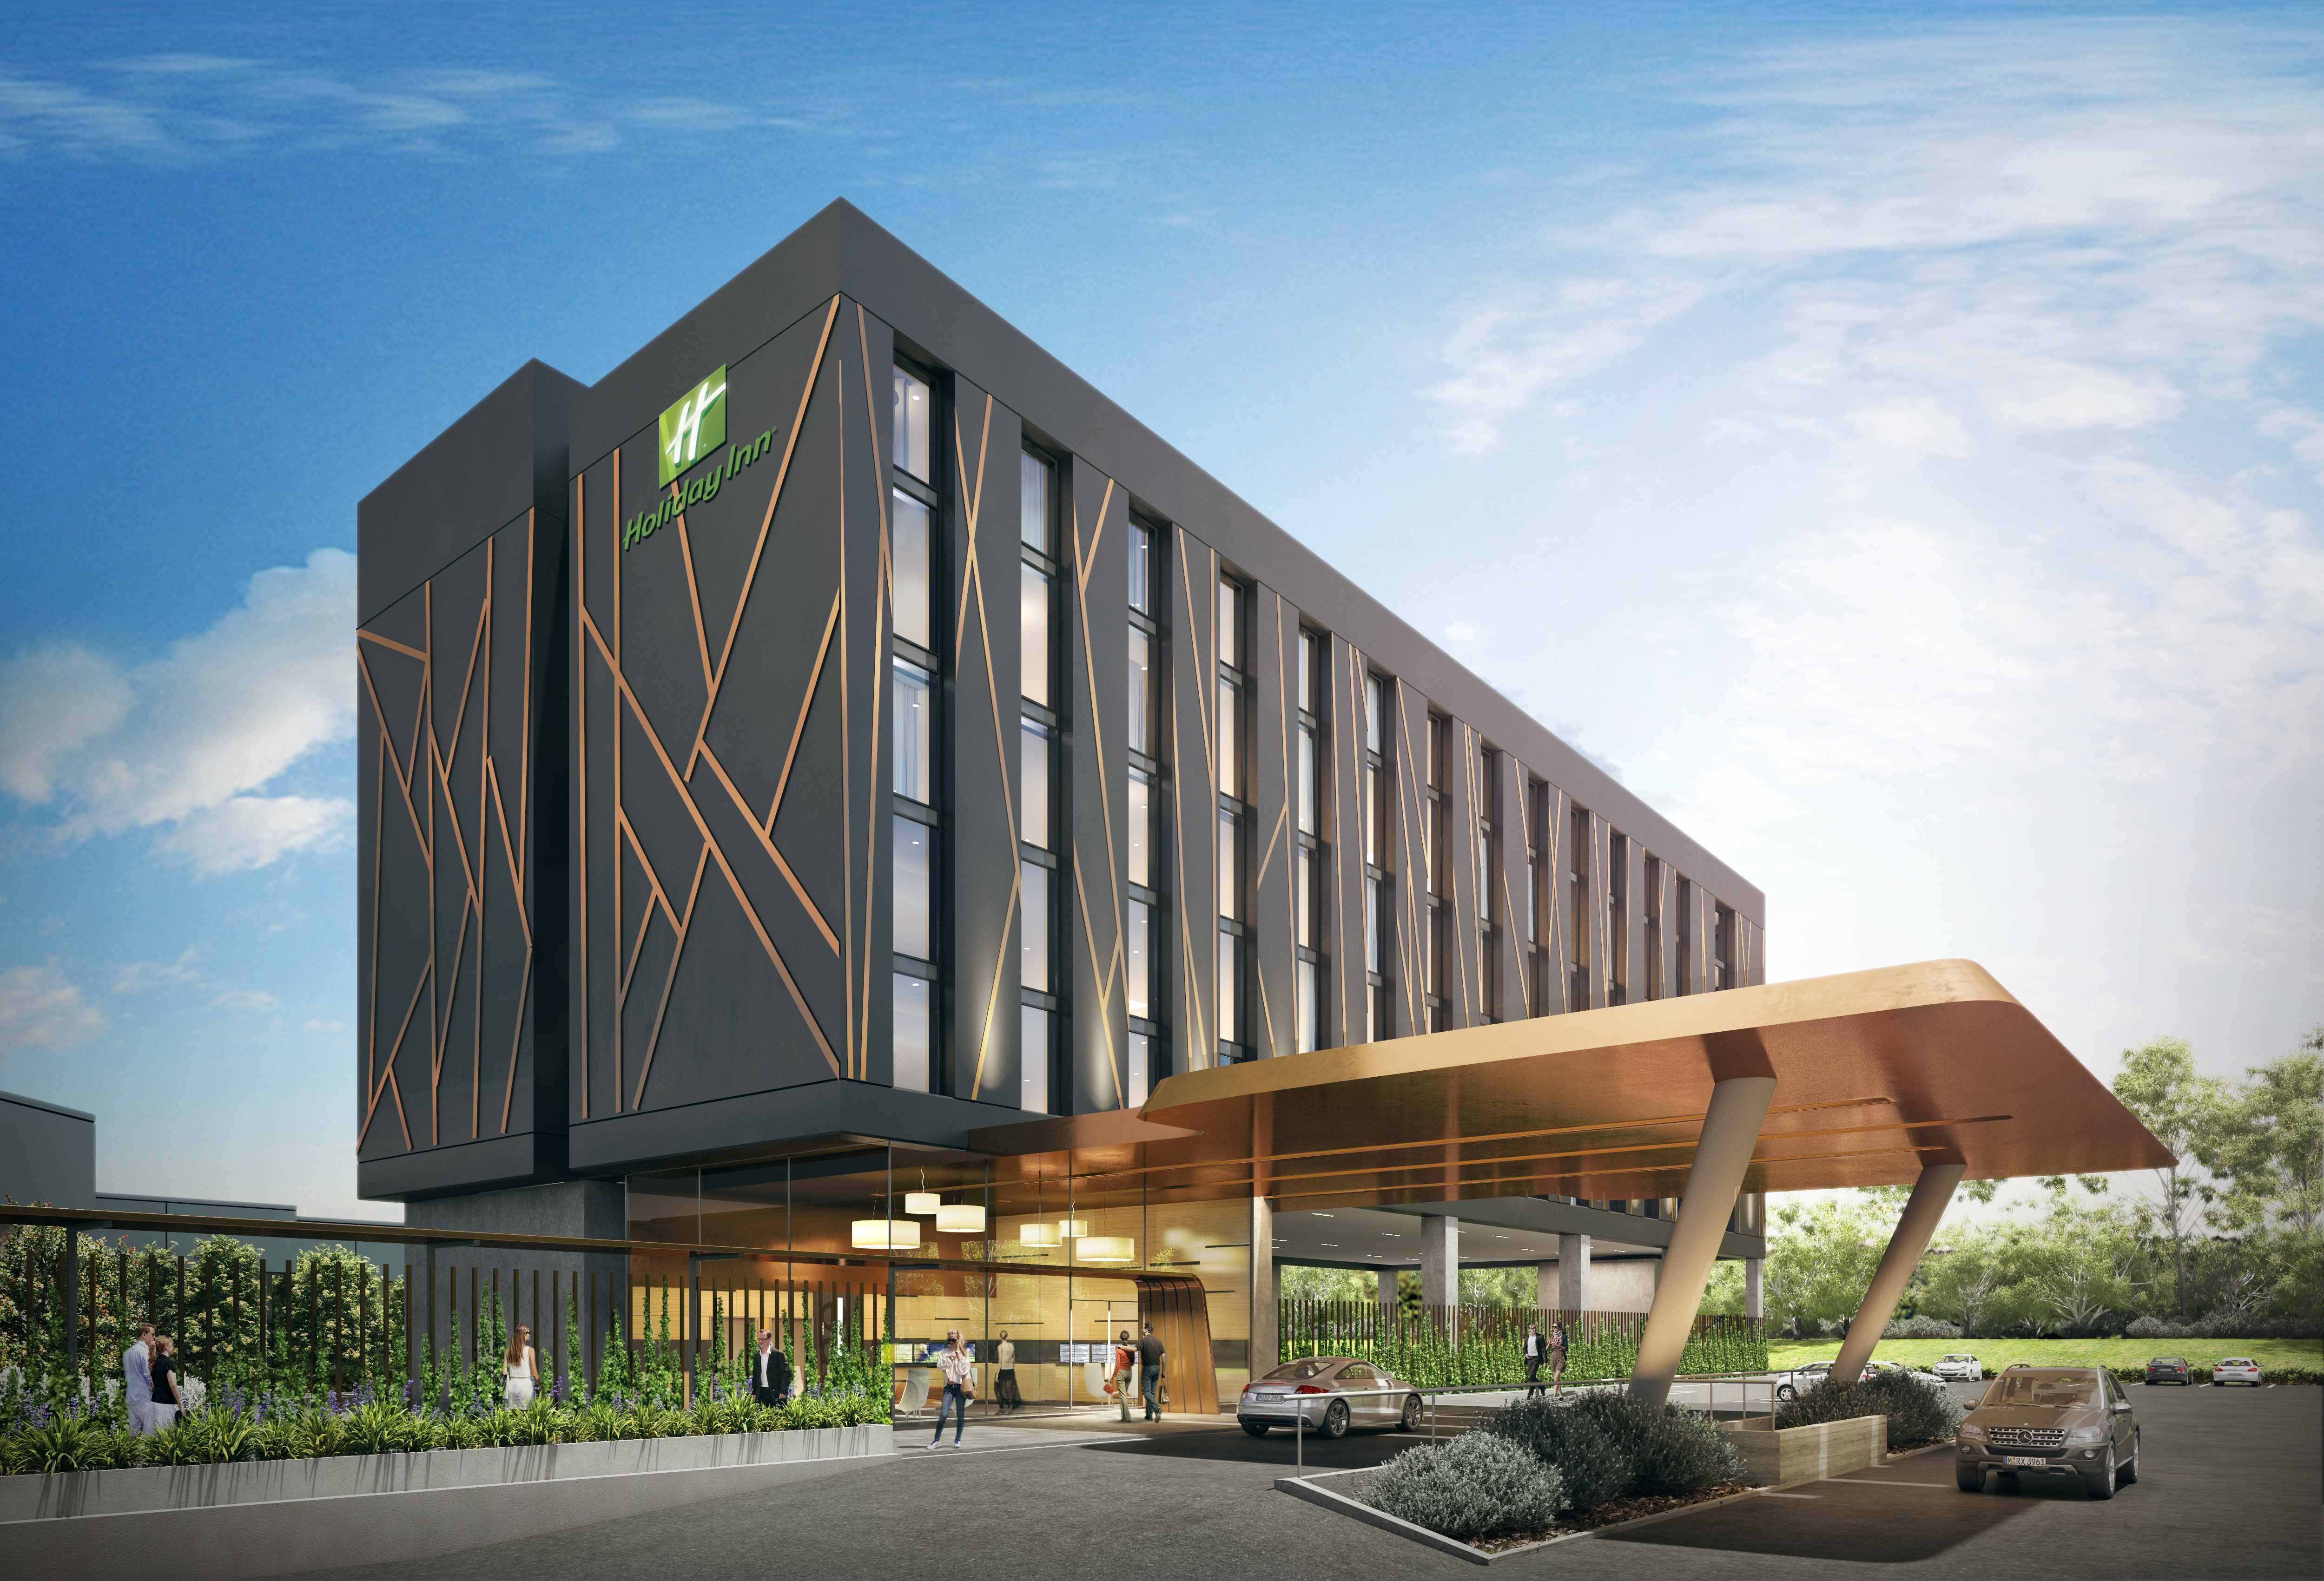 Holiday Inn's 12th hotel in Australia to open late 2017 in St Marys, Greater Sydney